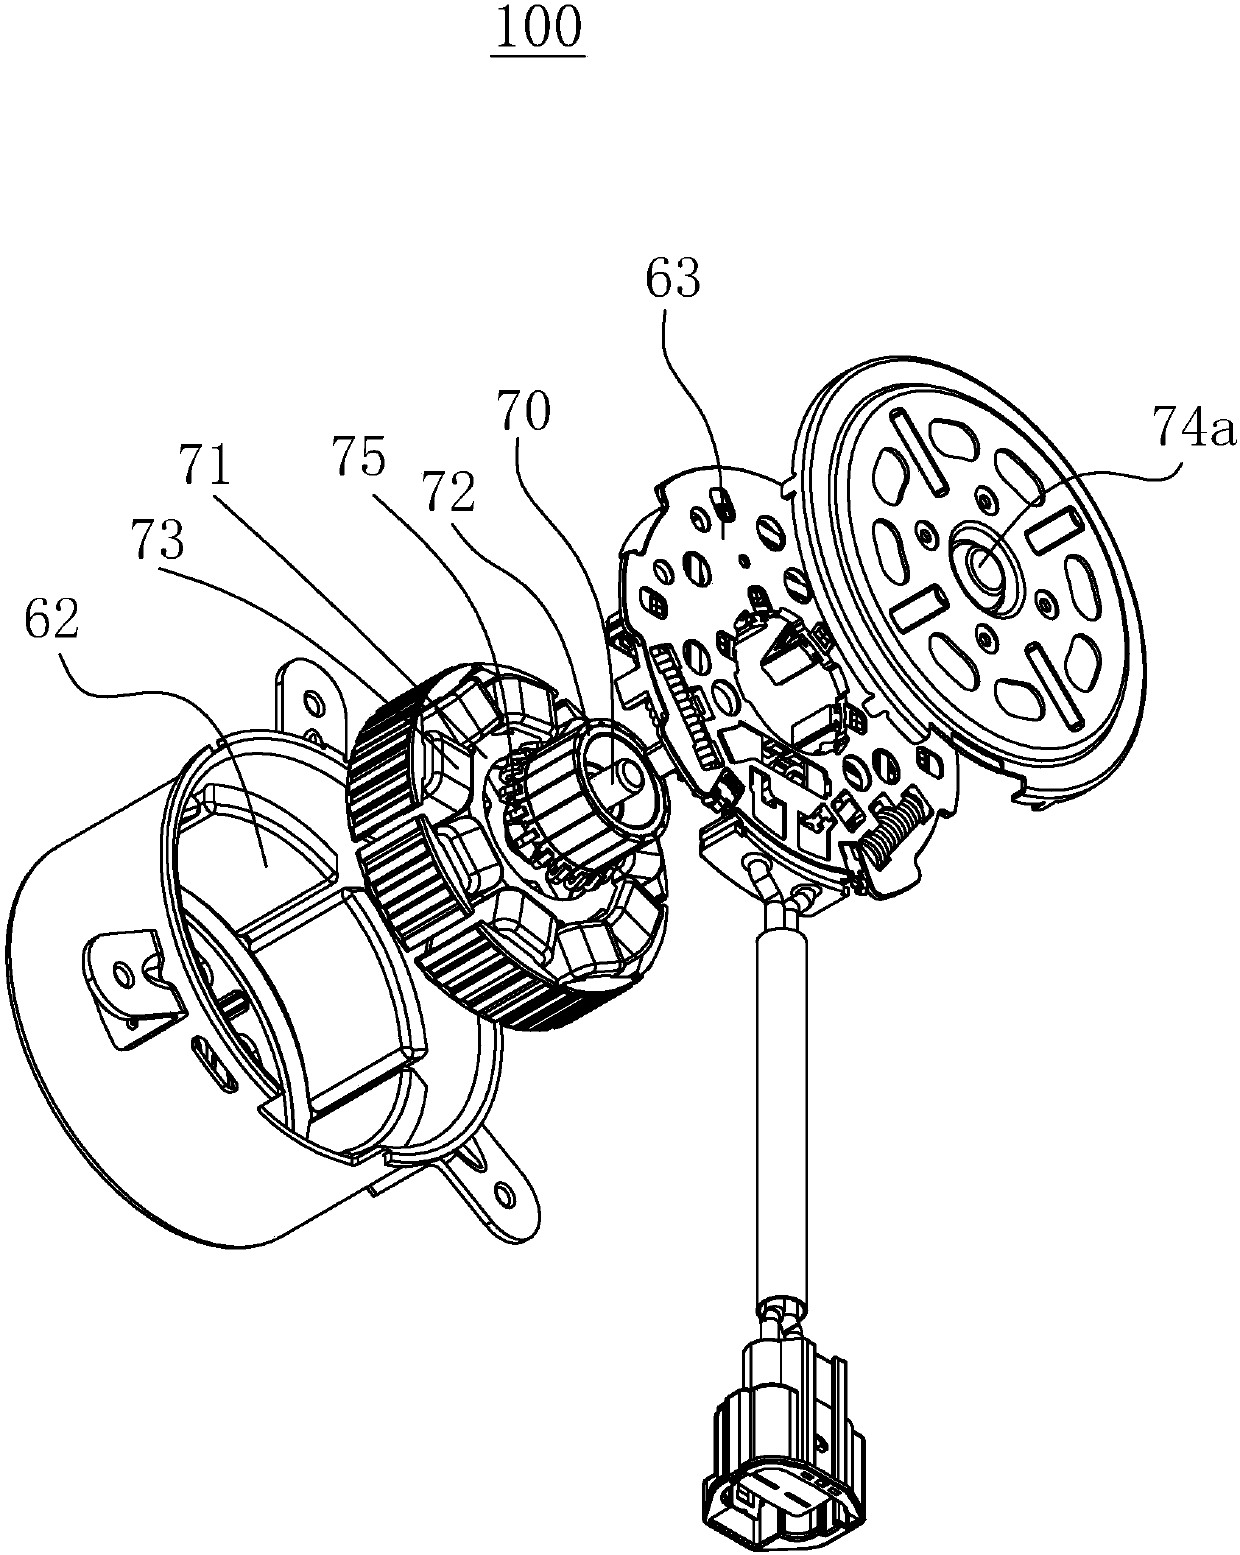 Cooling module and brush motor thereof